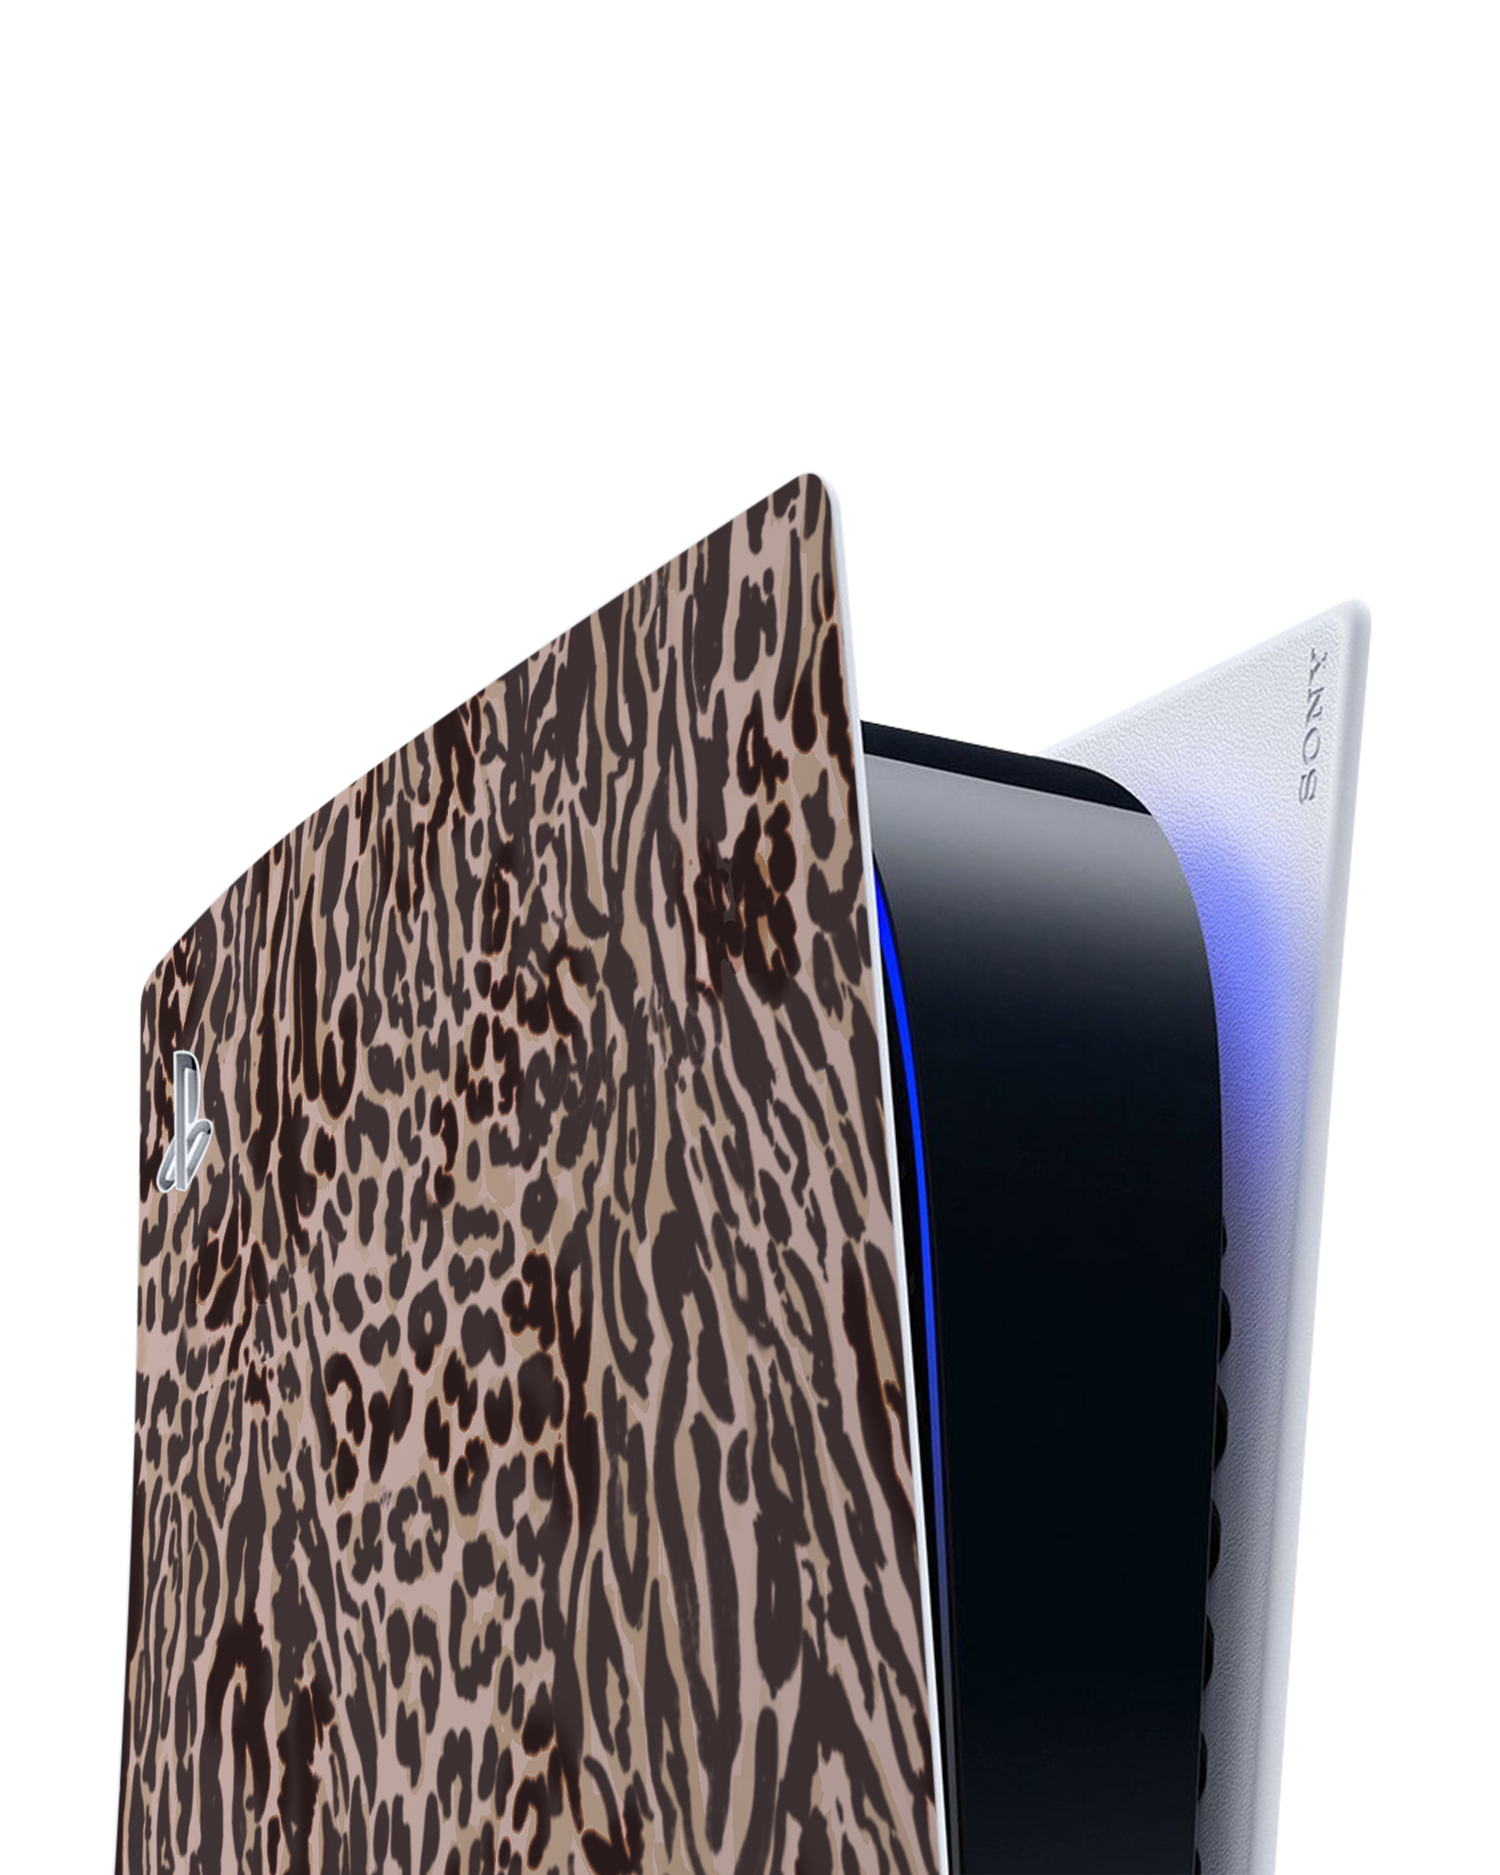 Animal Skin Tough Love Console Skin for Sony PlayStation 5 Digital Edition: Detail shot